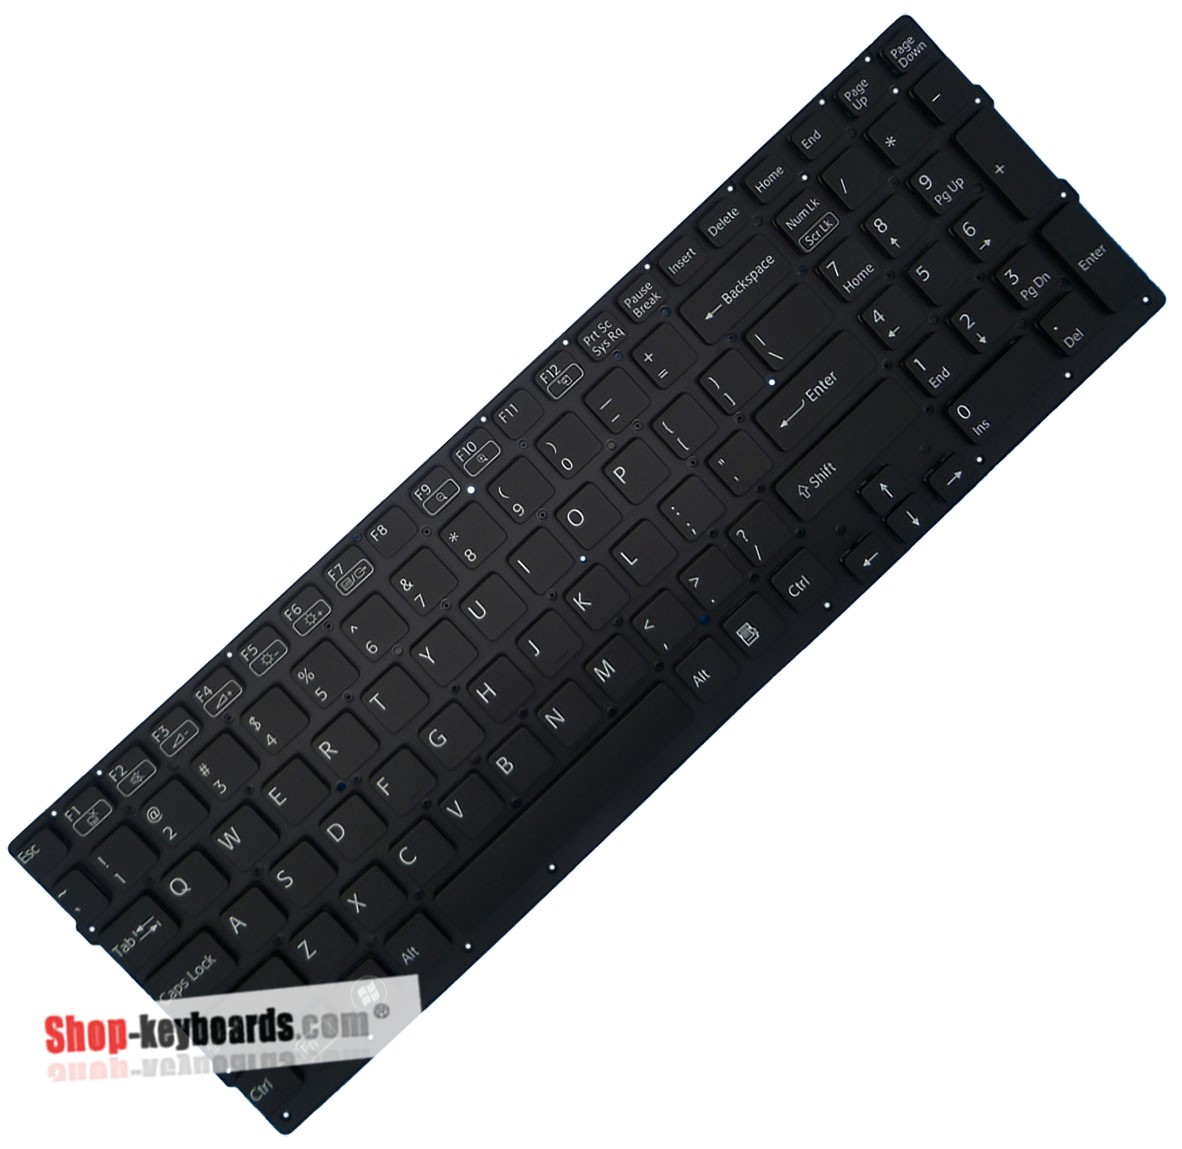 Sony VAIO VPC-CB16FG Keyboard replacement